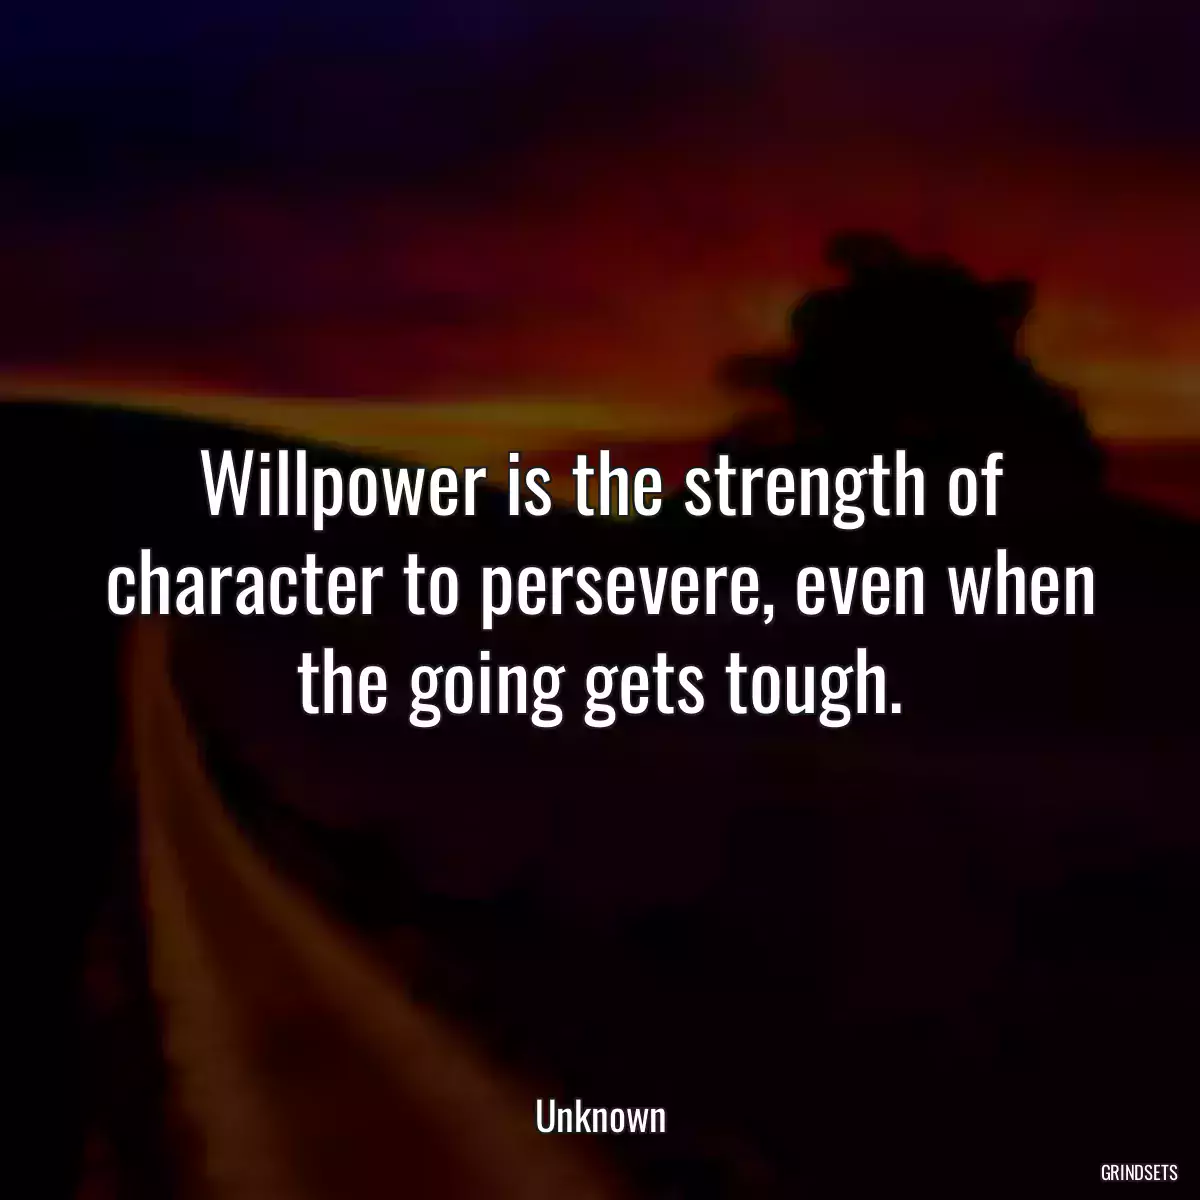 Willpower is the strength of character to persevere, even when the going gets tough.